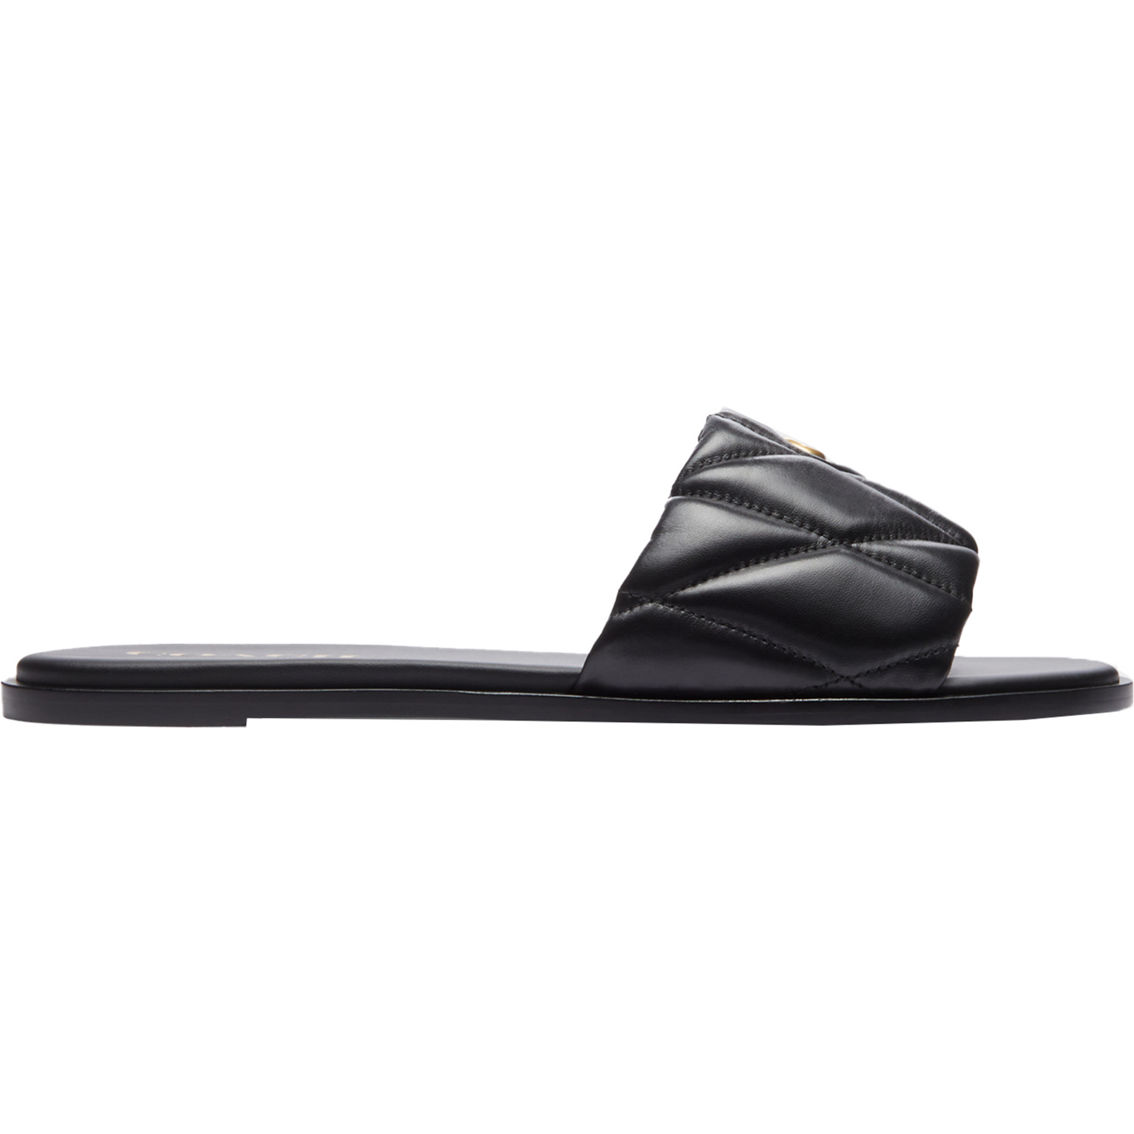 Coach Women's Holly Quilted Leather Sandals - Image 2 of 4